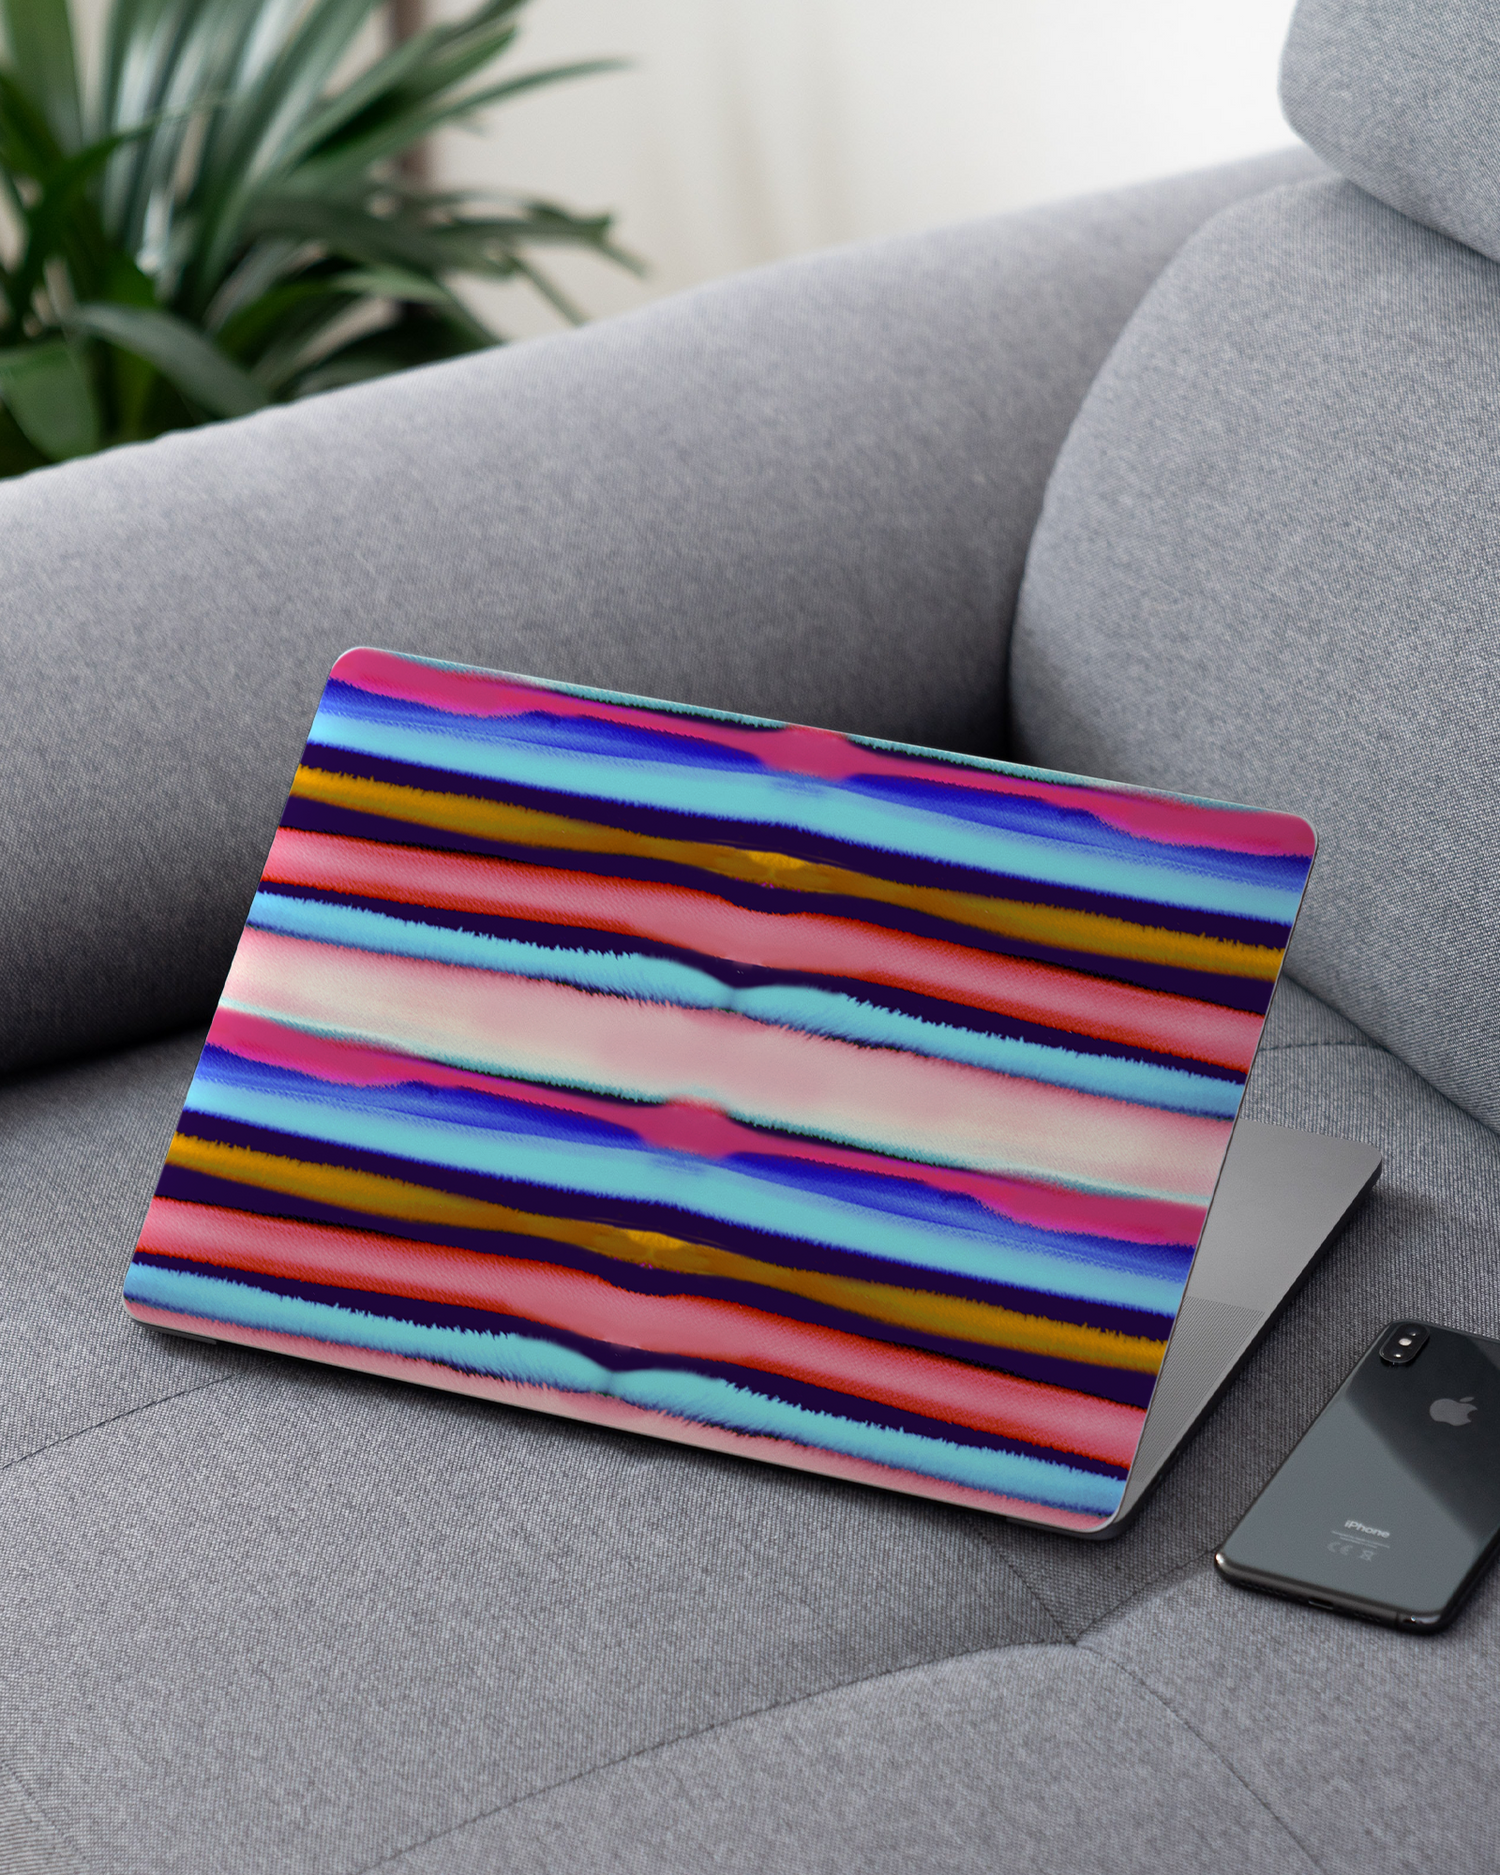 Watercolor Stripes Laptop Skin for 13 inch Apple MacBooks on a couch